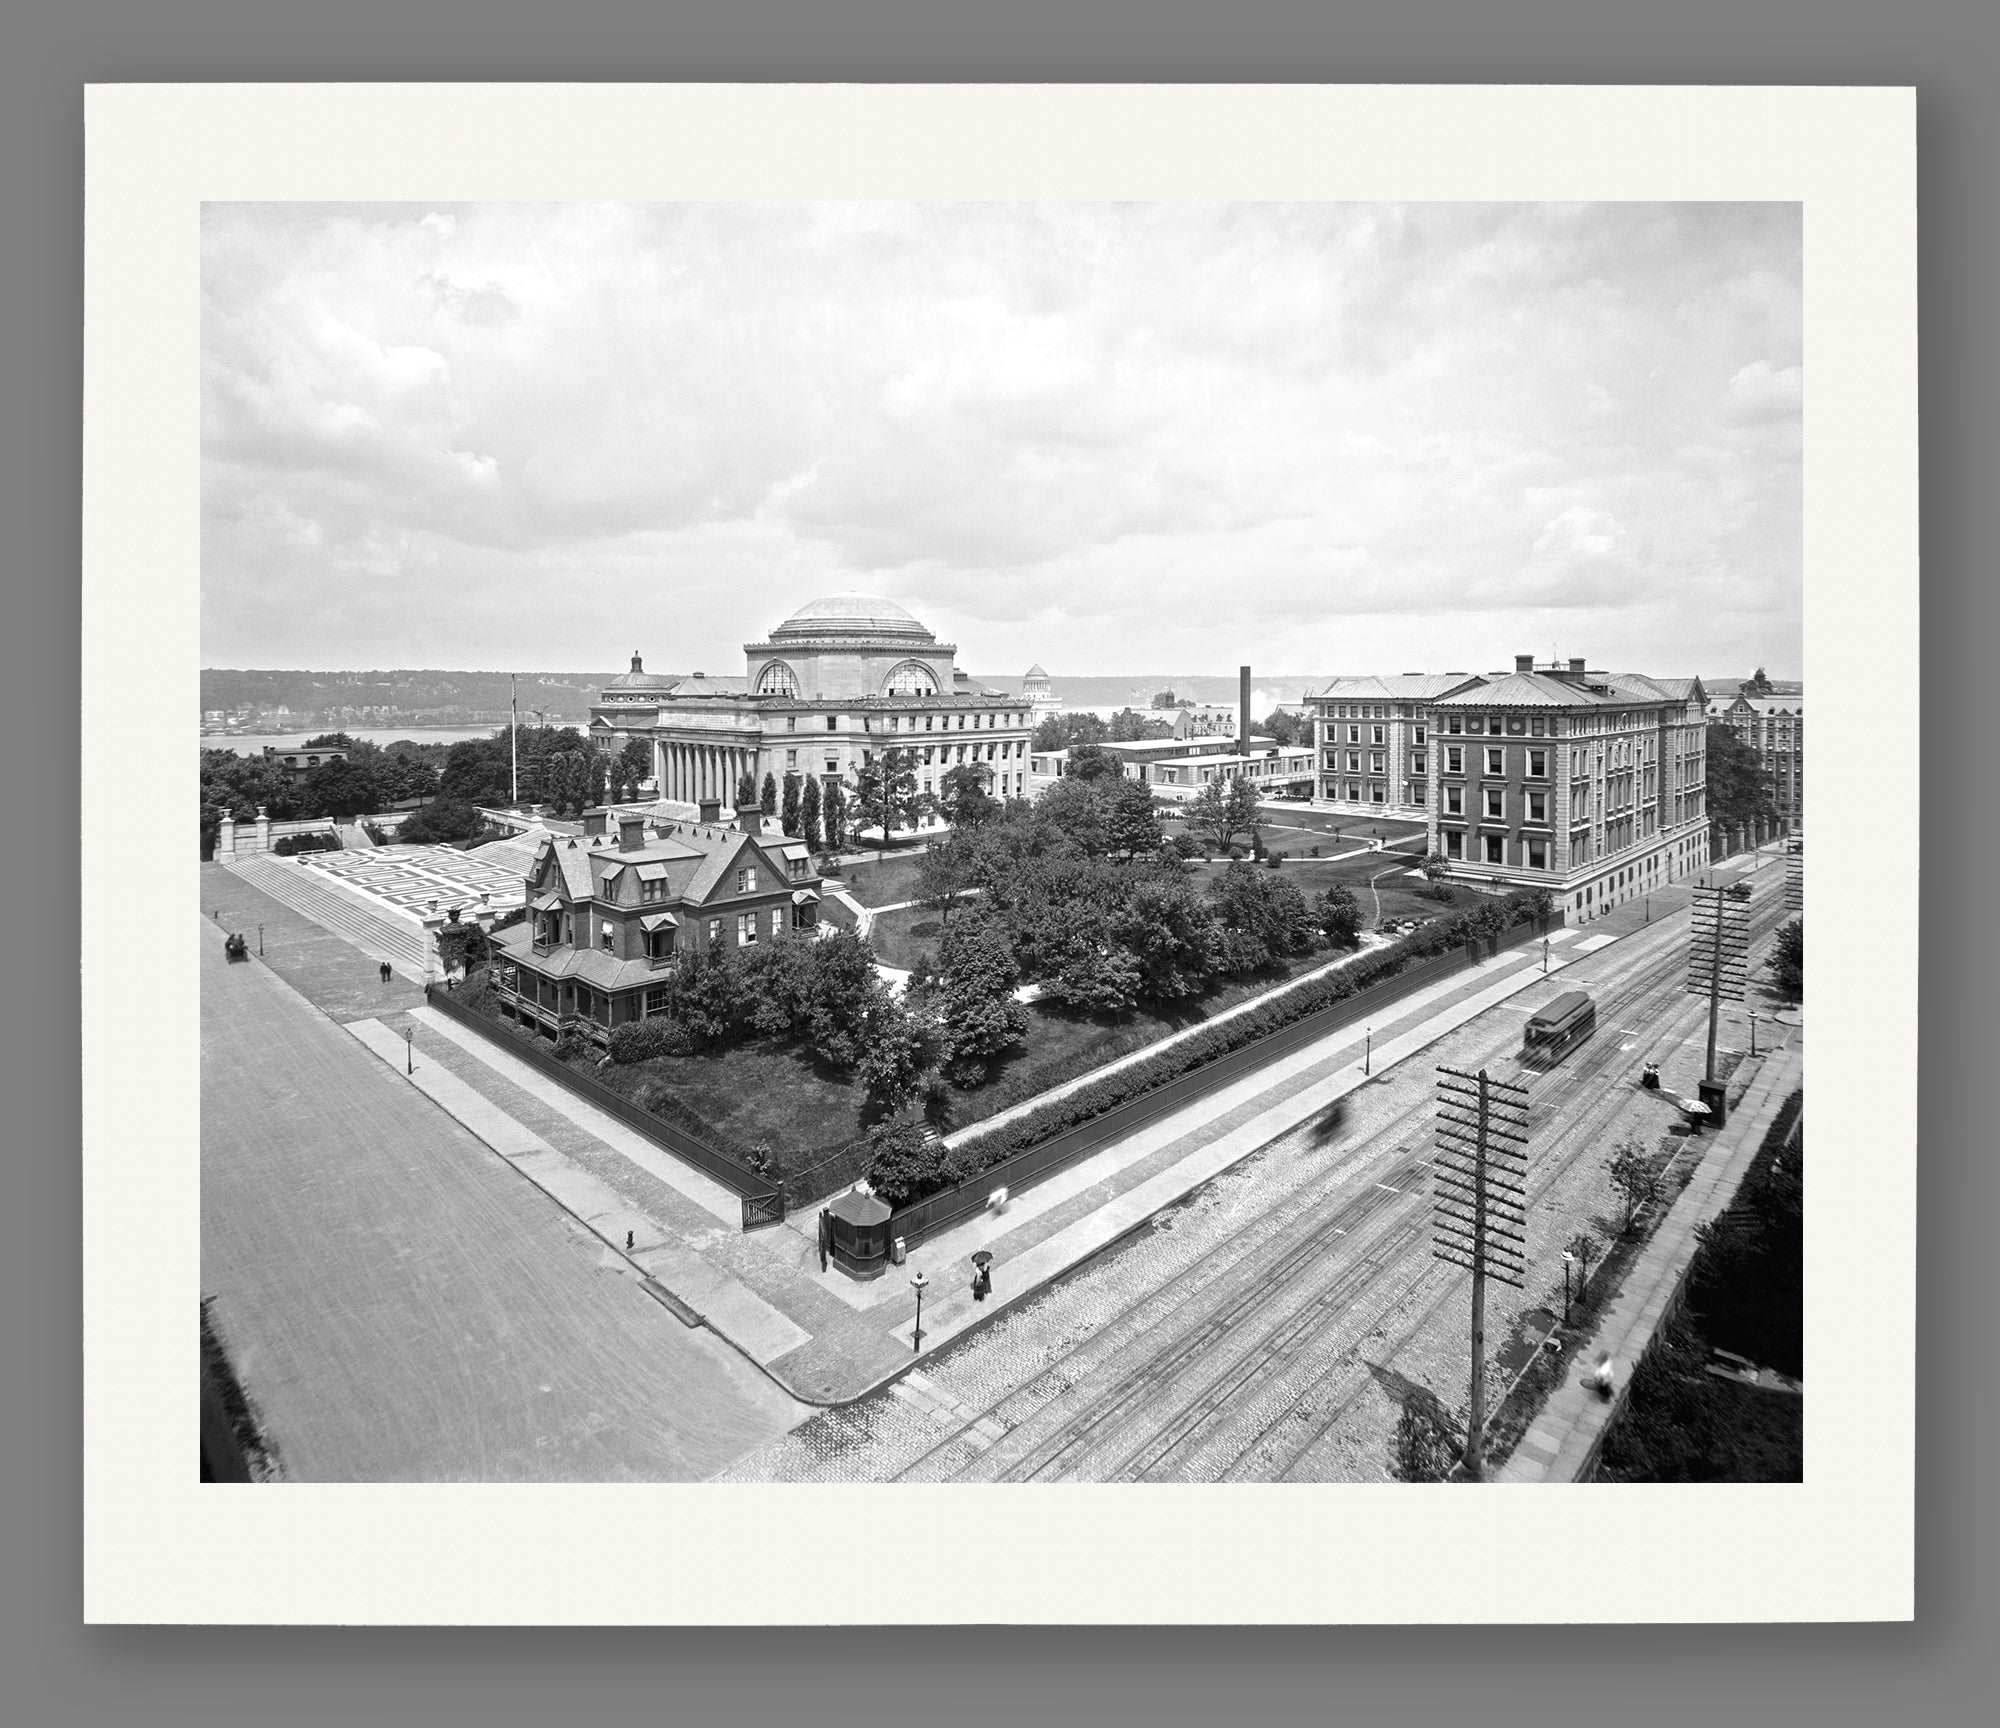 A fine art paper print featuring vintage photography of Columbia University